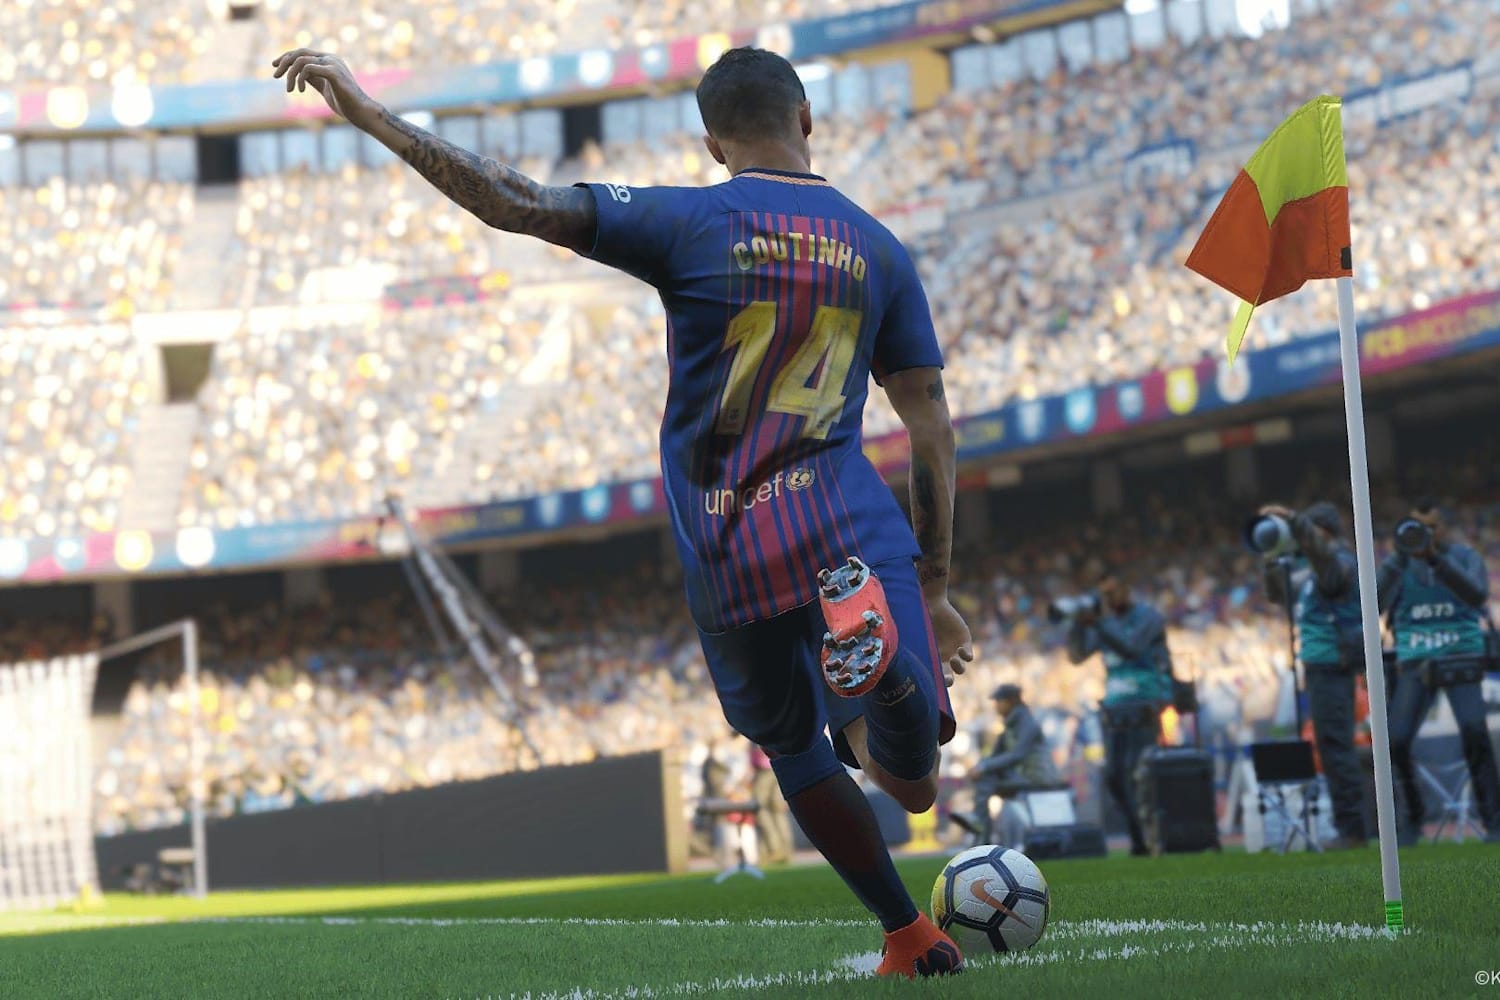 Pes 2019 Football Game Preview - national football league and roblox team up to celebrate